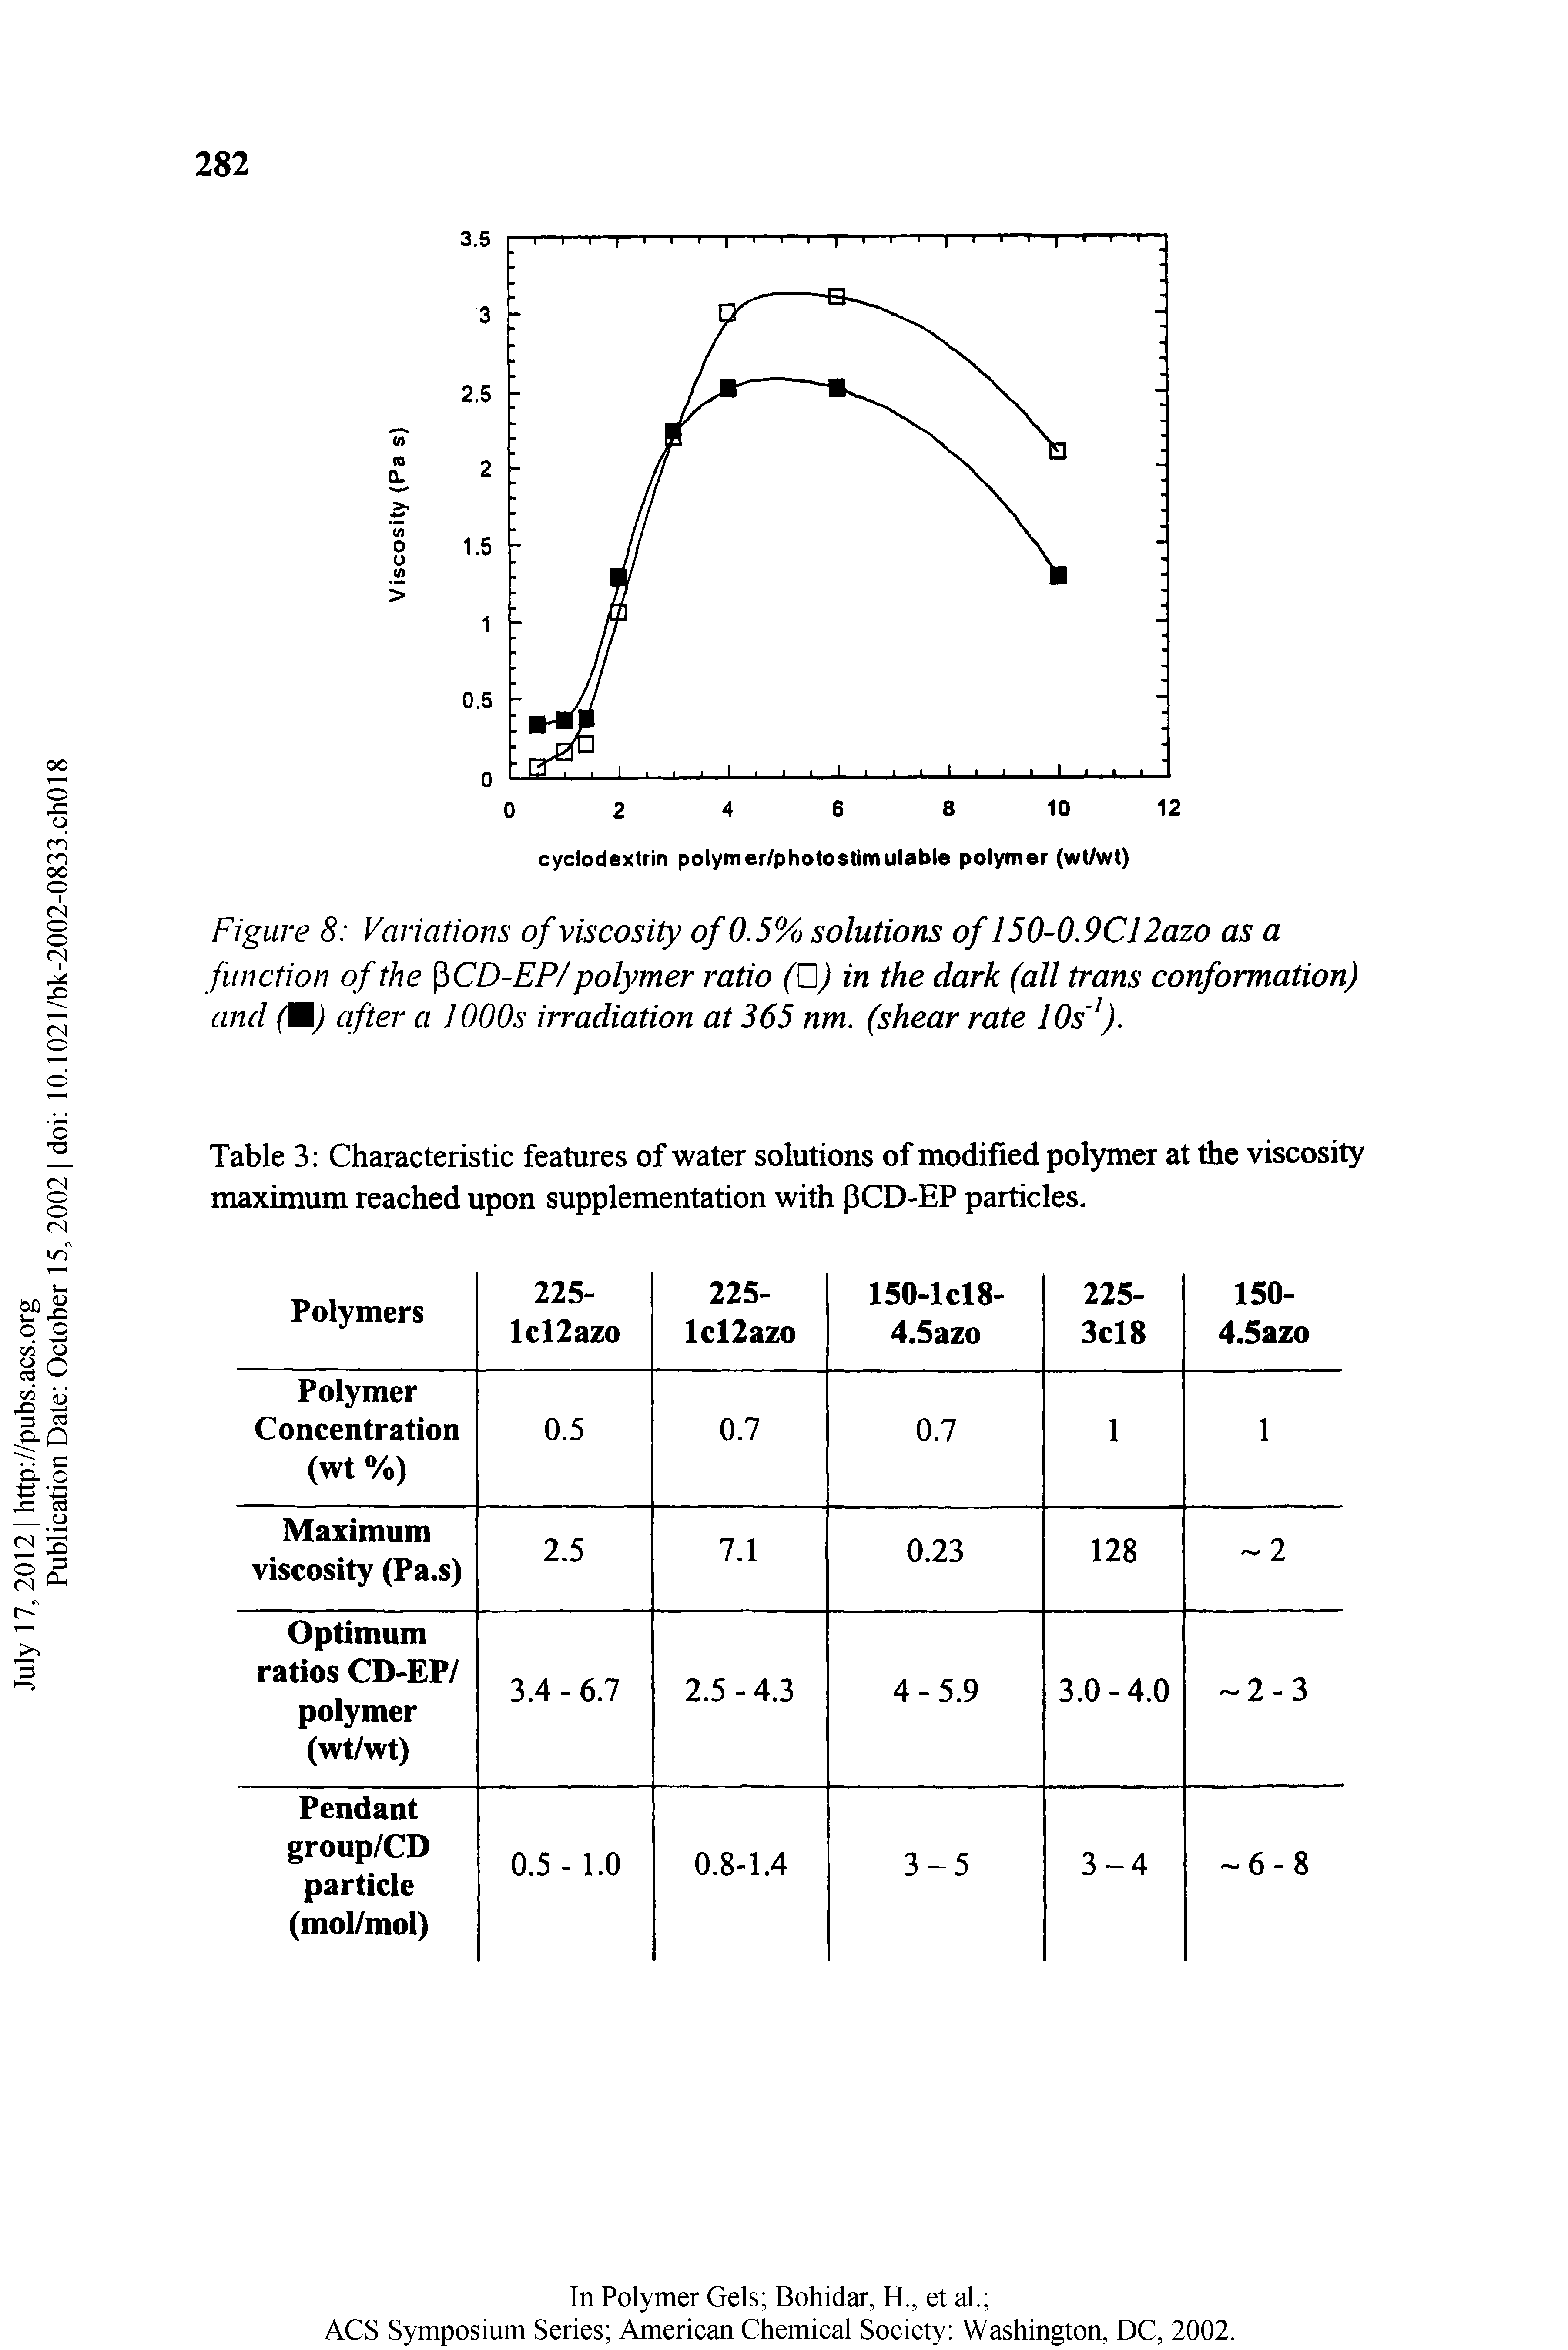 Figure 8 Variations of viscosity of 0.5% solutions of 150-0.9C12azo as a function of the CD-EP/polymer ratio (U) in the dark (all trans conformation) and (M) after a 1000s irradiation at 365 nm. (shear rate lOs f.